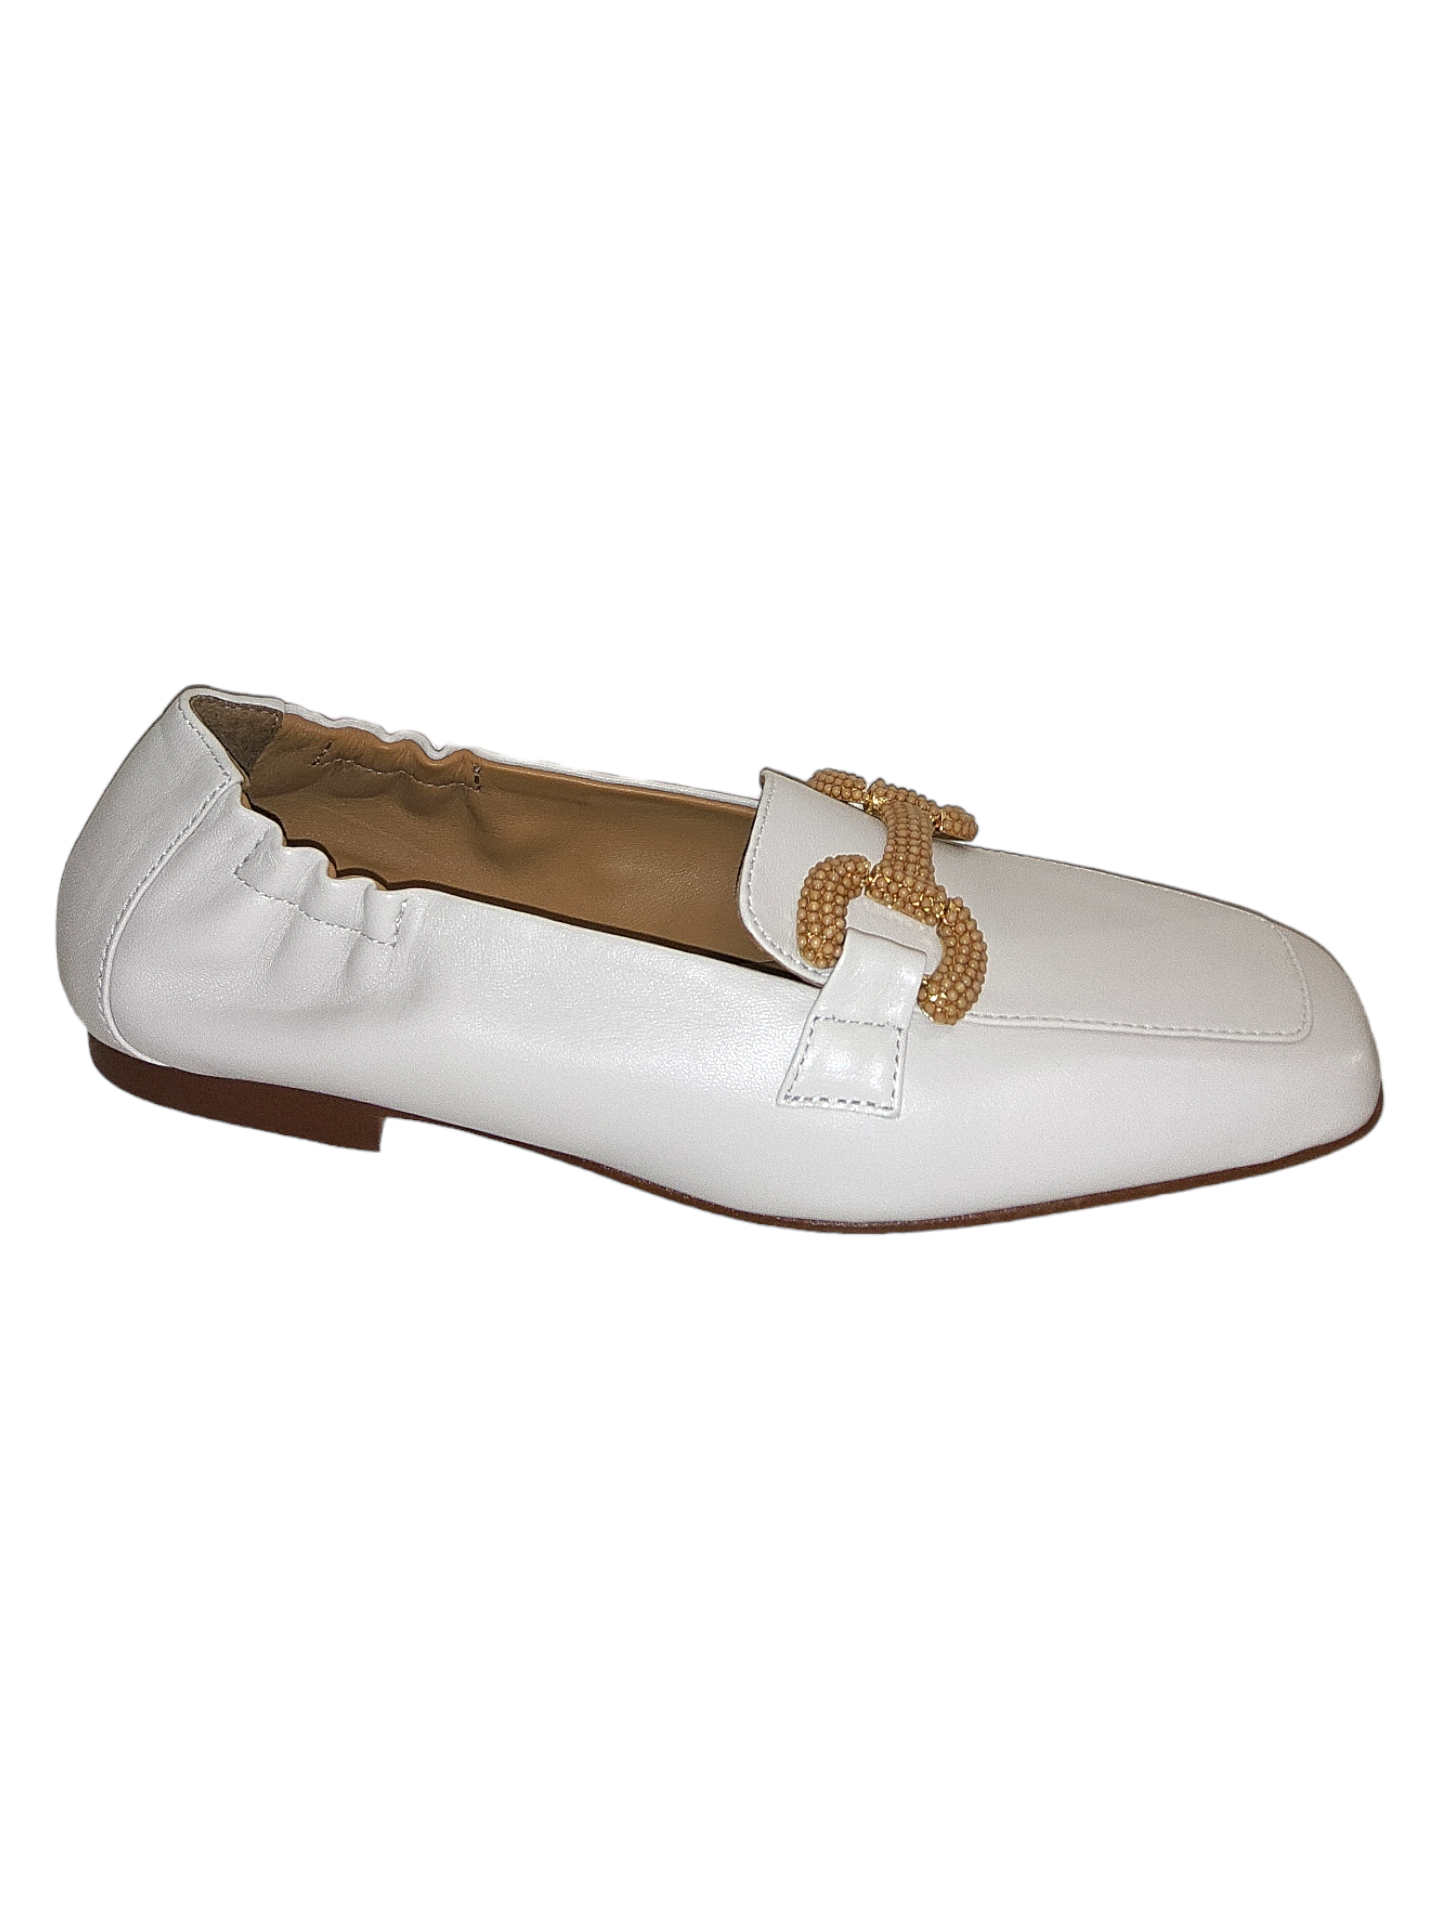 Cream leather loafers